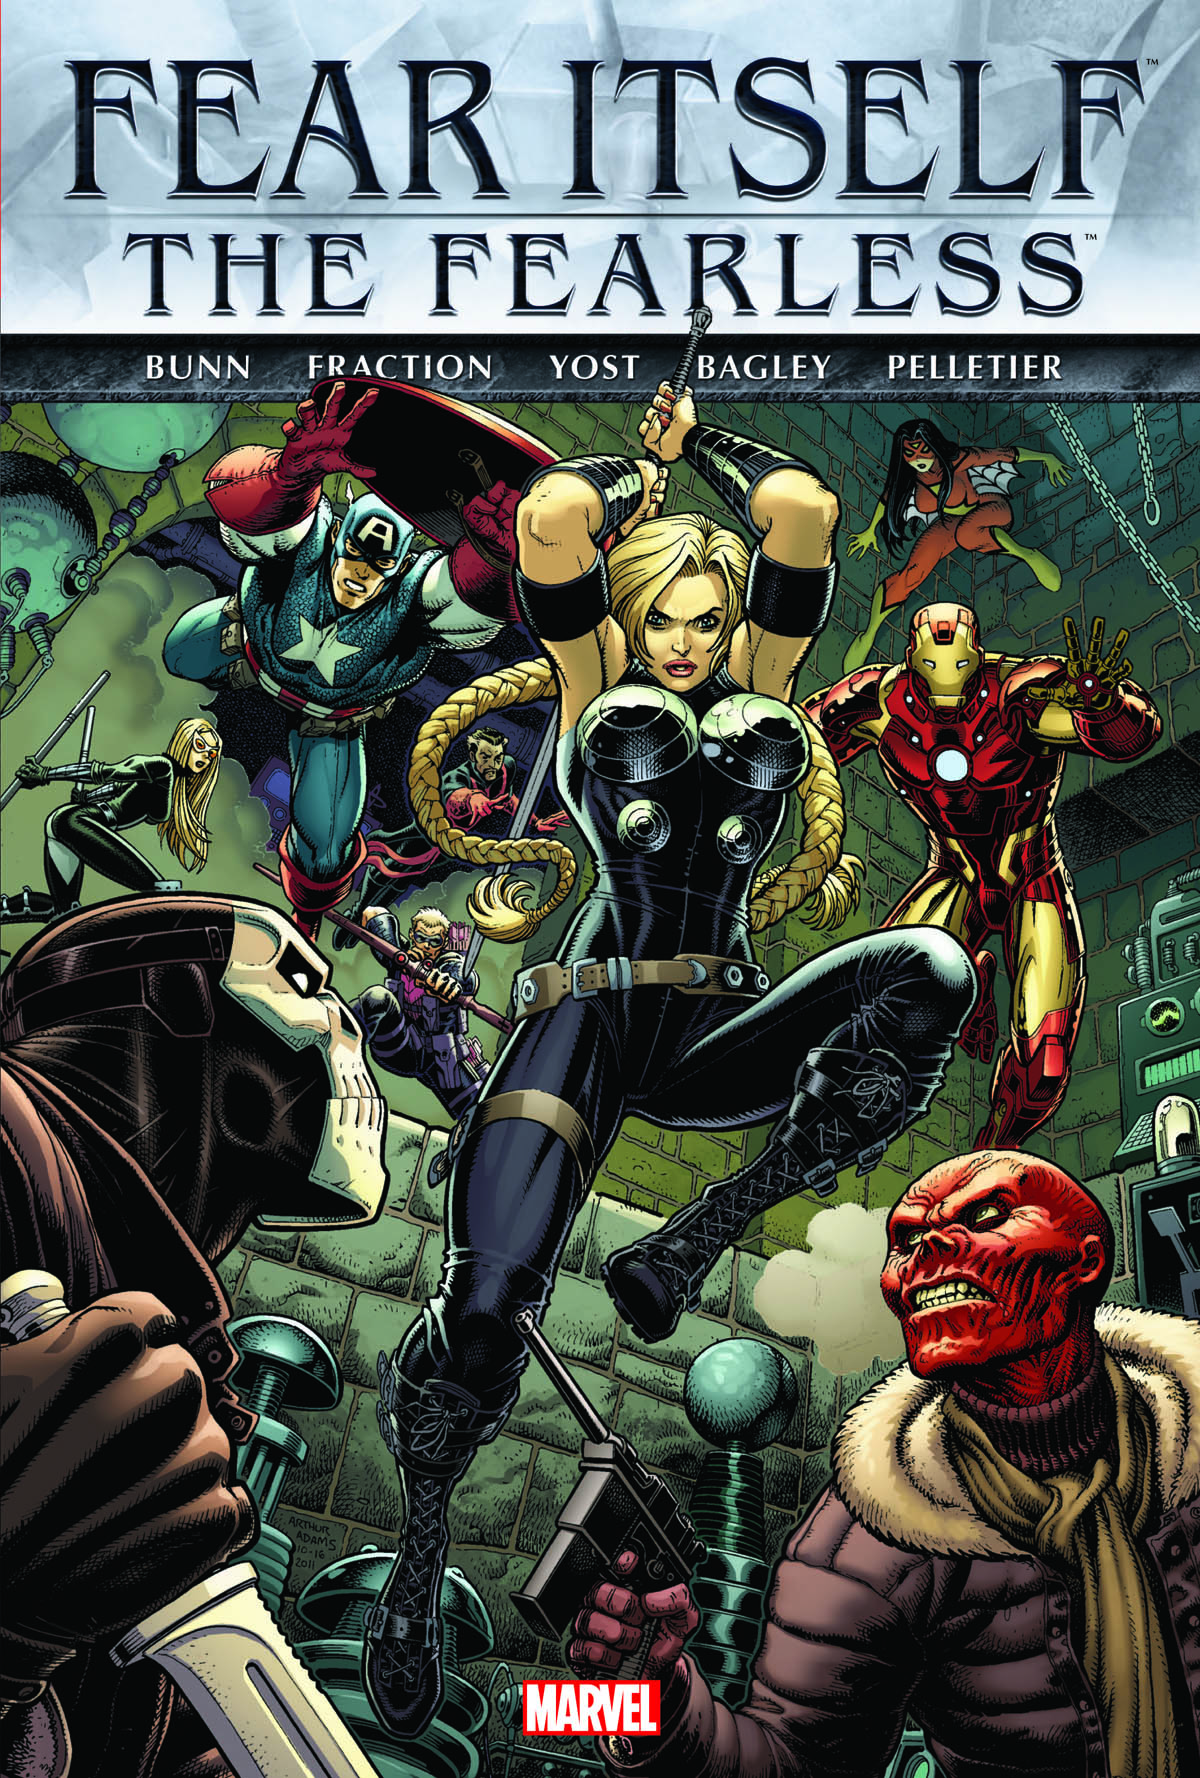 FEAR ITSELF: THE FEARLESS TPB (Trade Paperback)